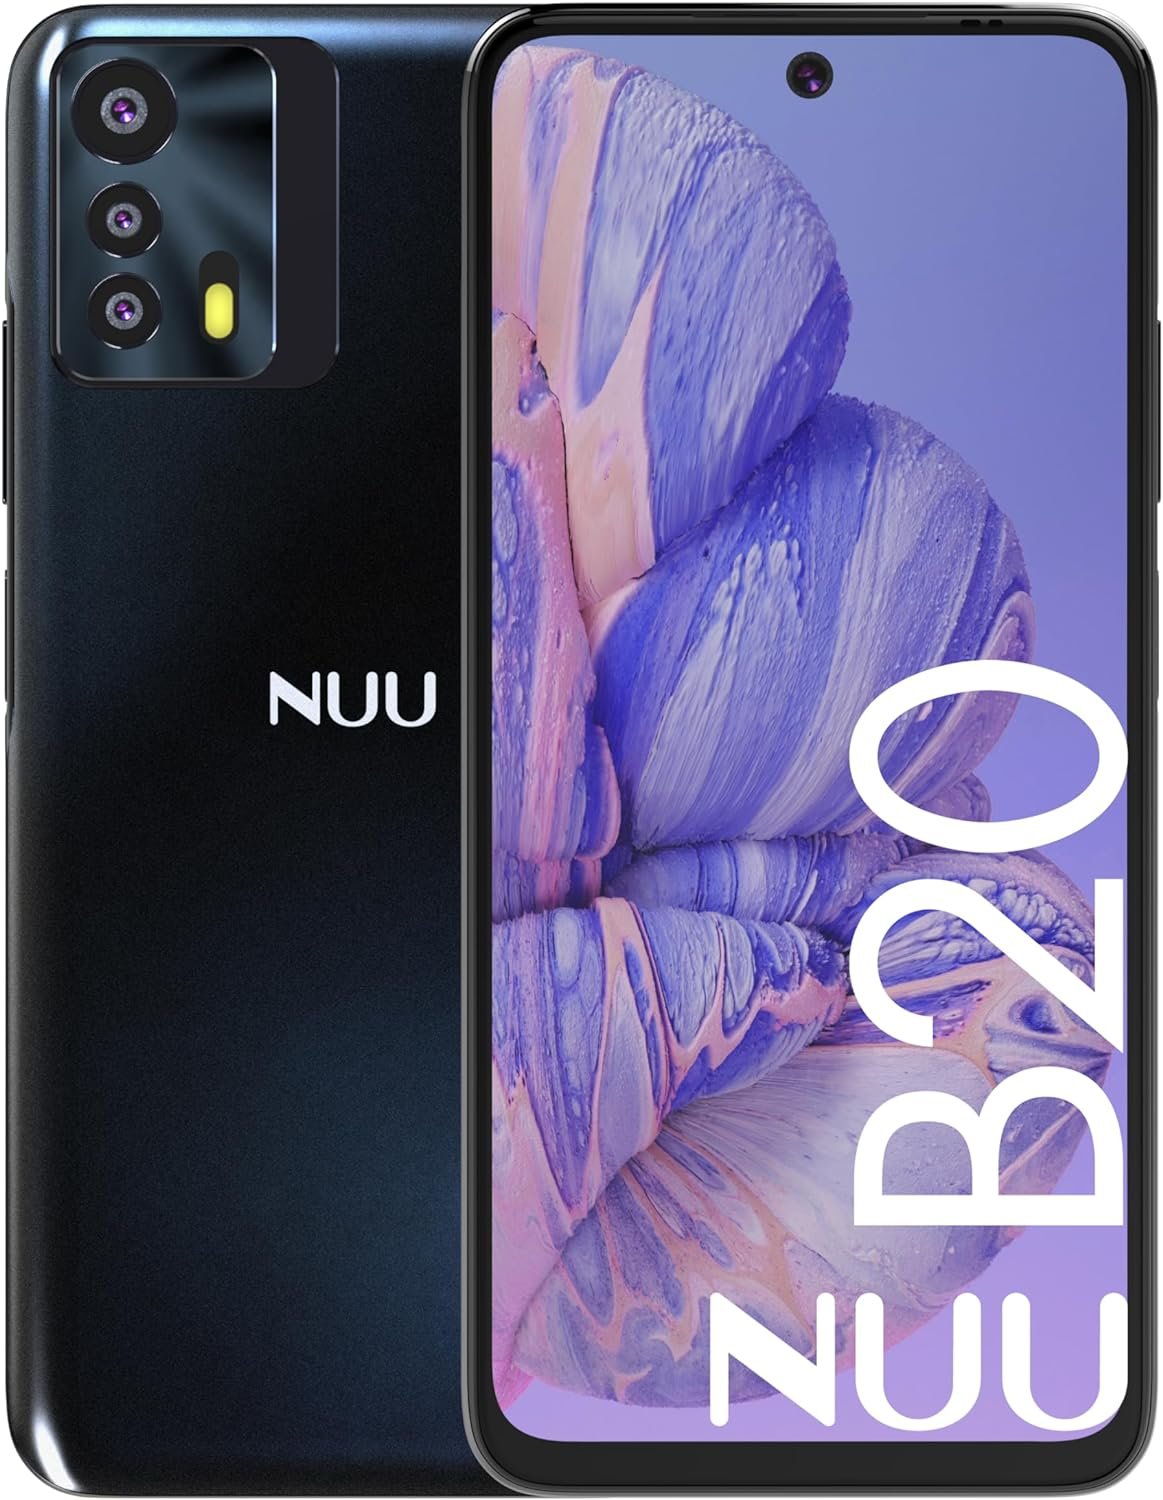 NUU B20 Unlocked Android Cell Phone: A Versatile Dual SIM 5G Device